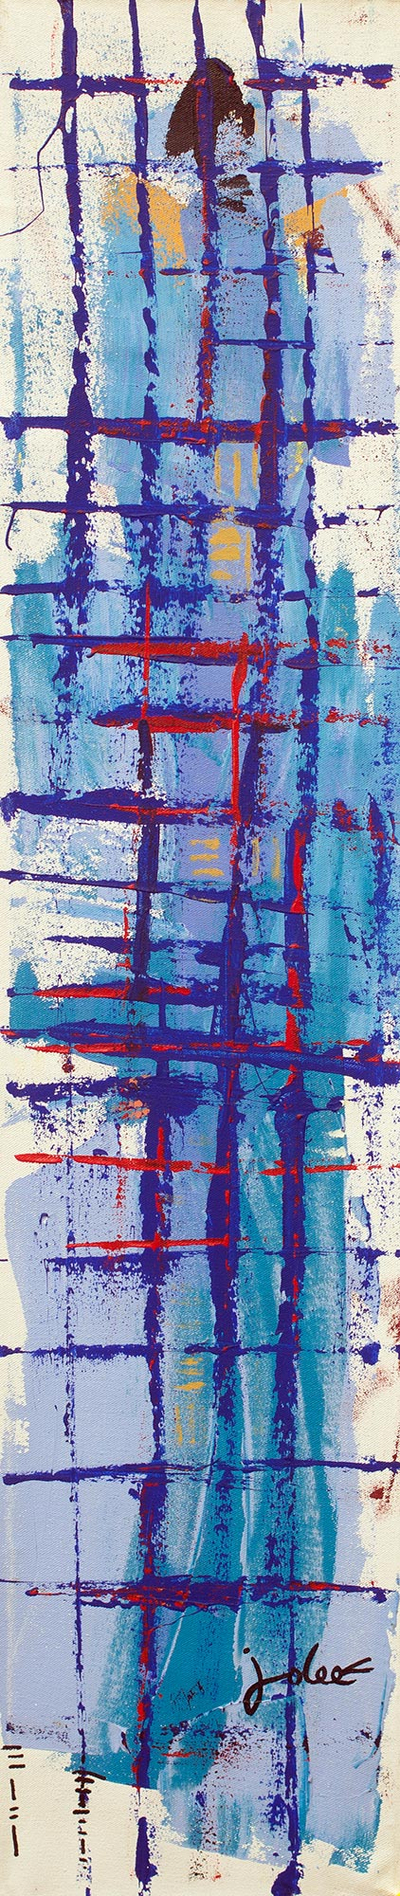 'Rhythm' - Tall Blue Abstract Art Signed Painting from Ghana